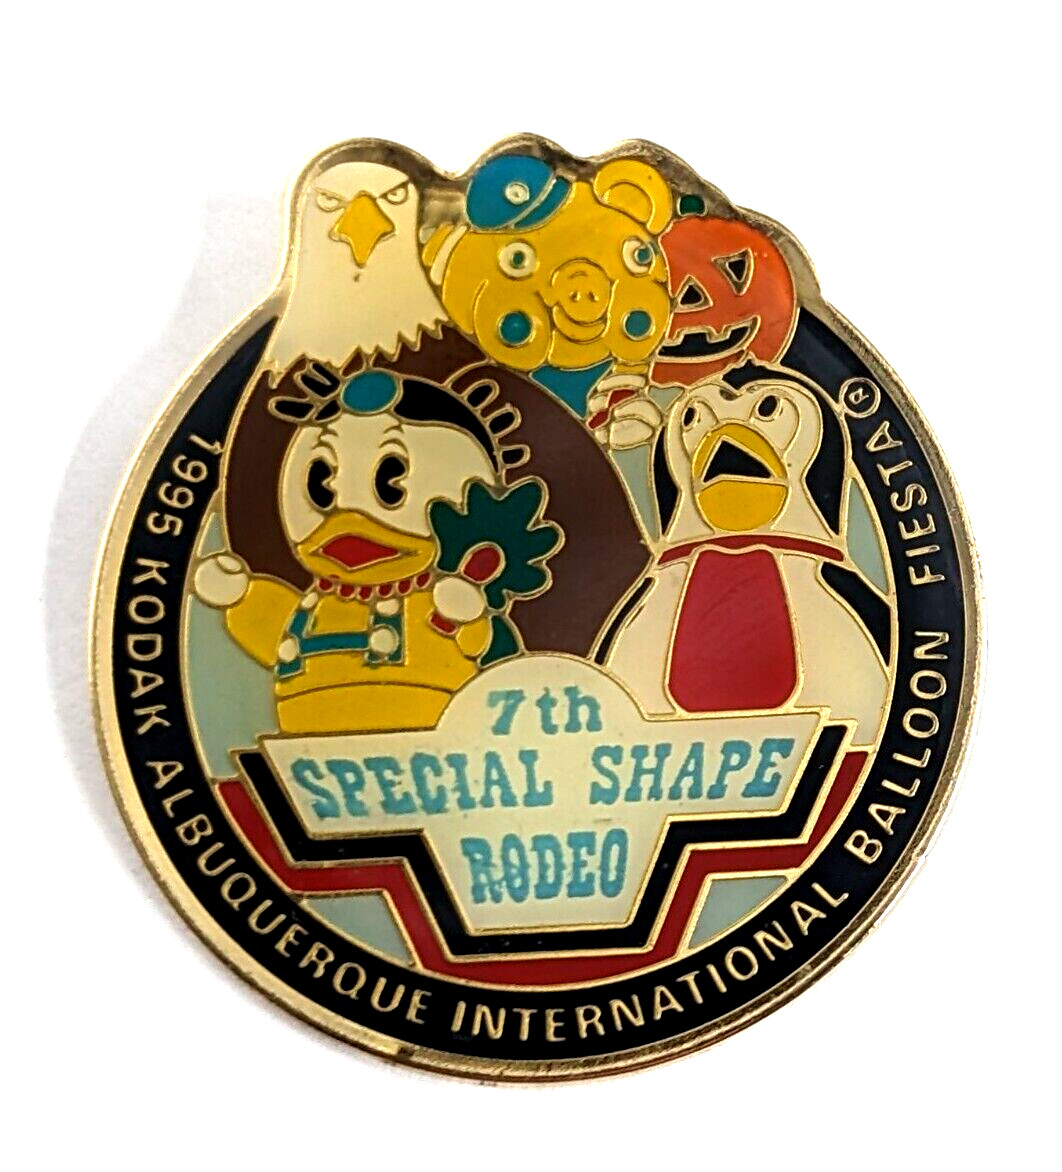 1995 Special Shapes Rodeo KAIBF Hot Air Balloon Pin Duck Eagle Pig Penguin...VTG